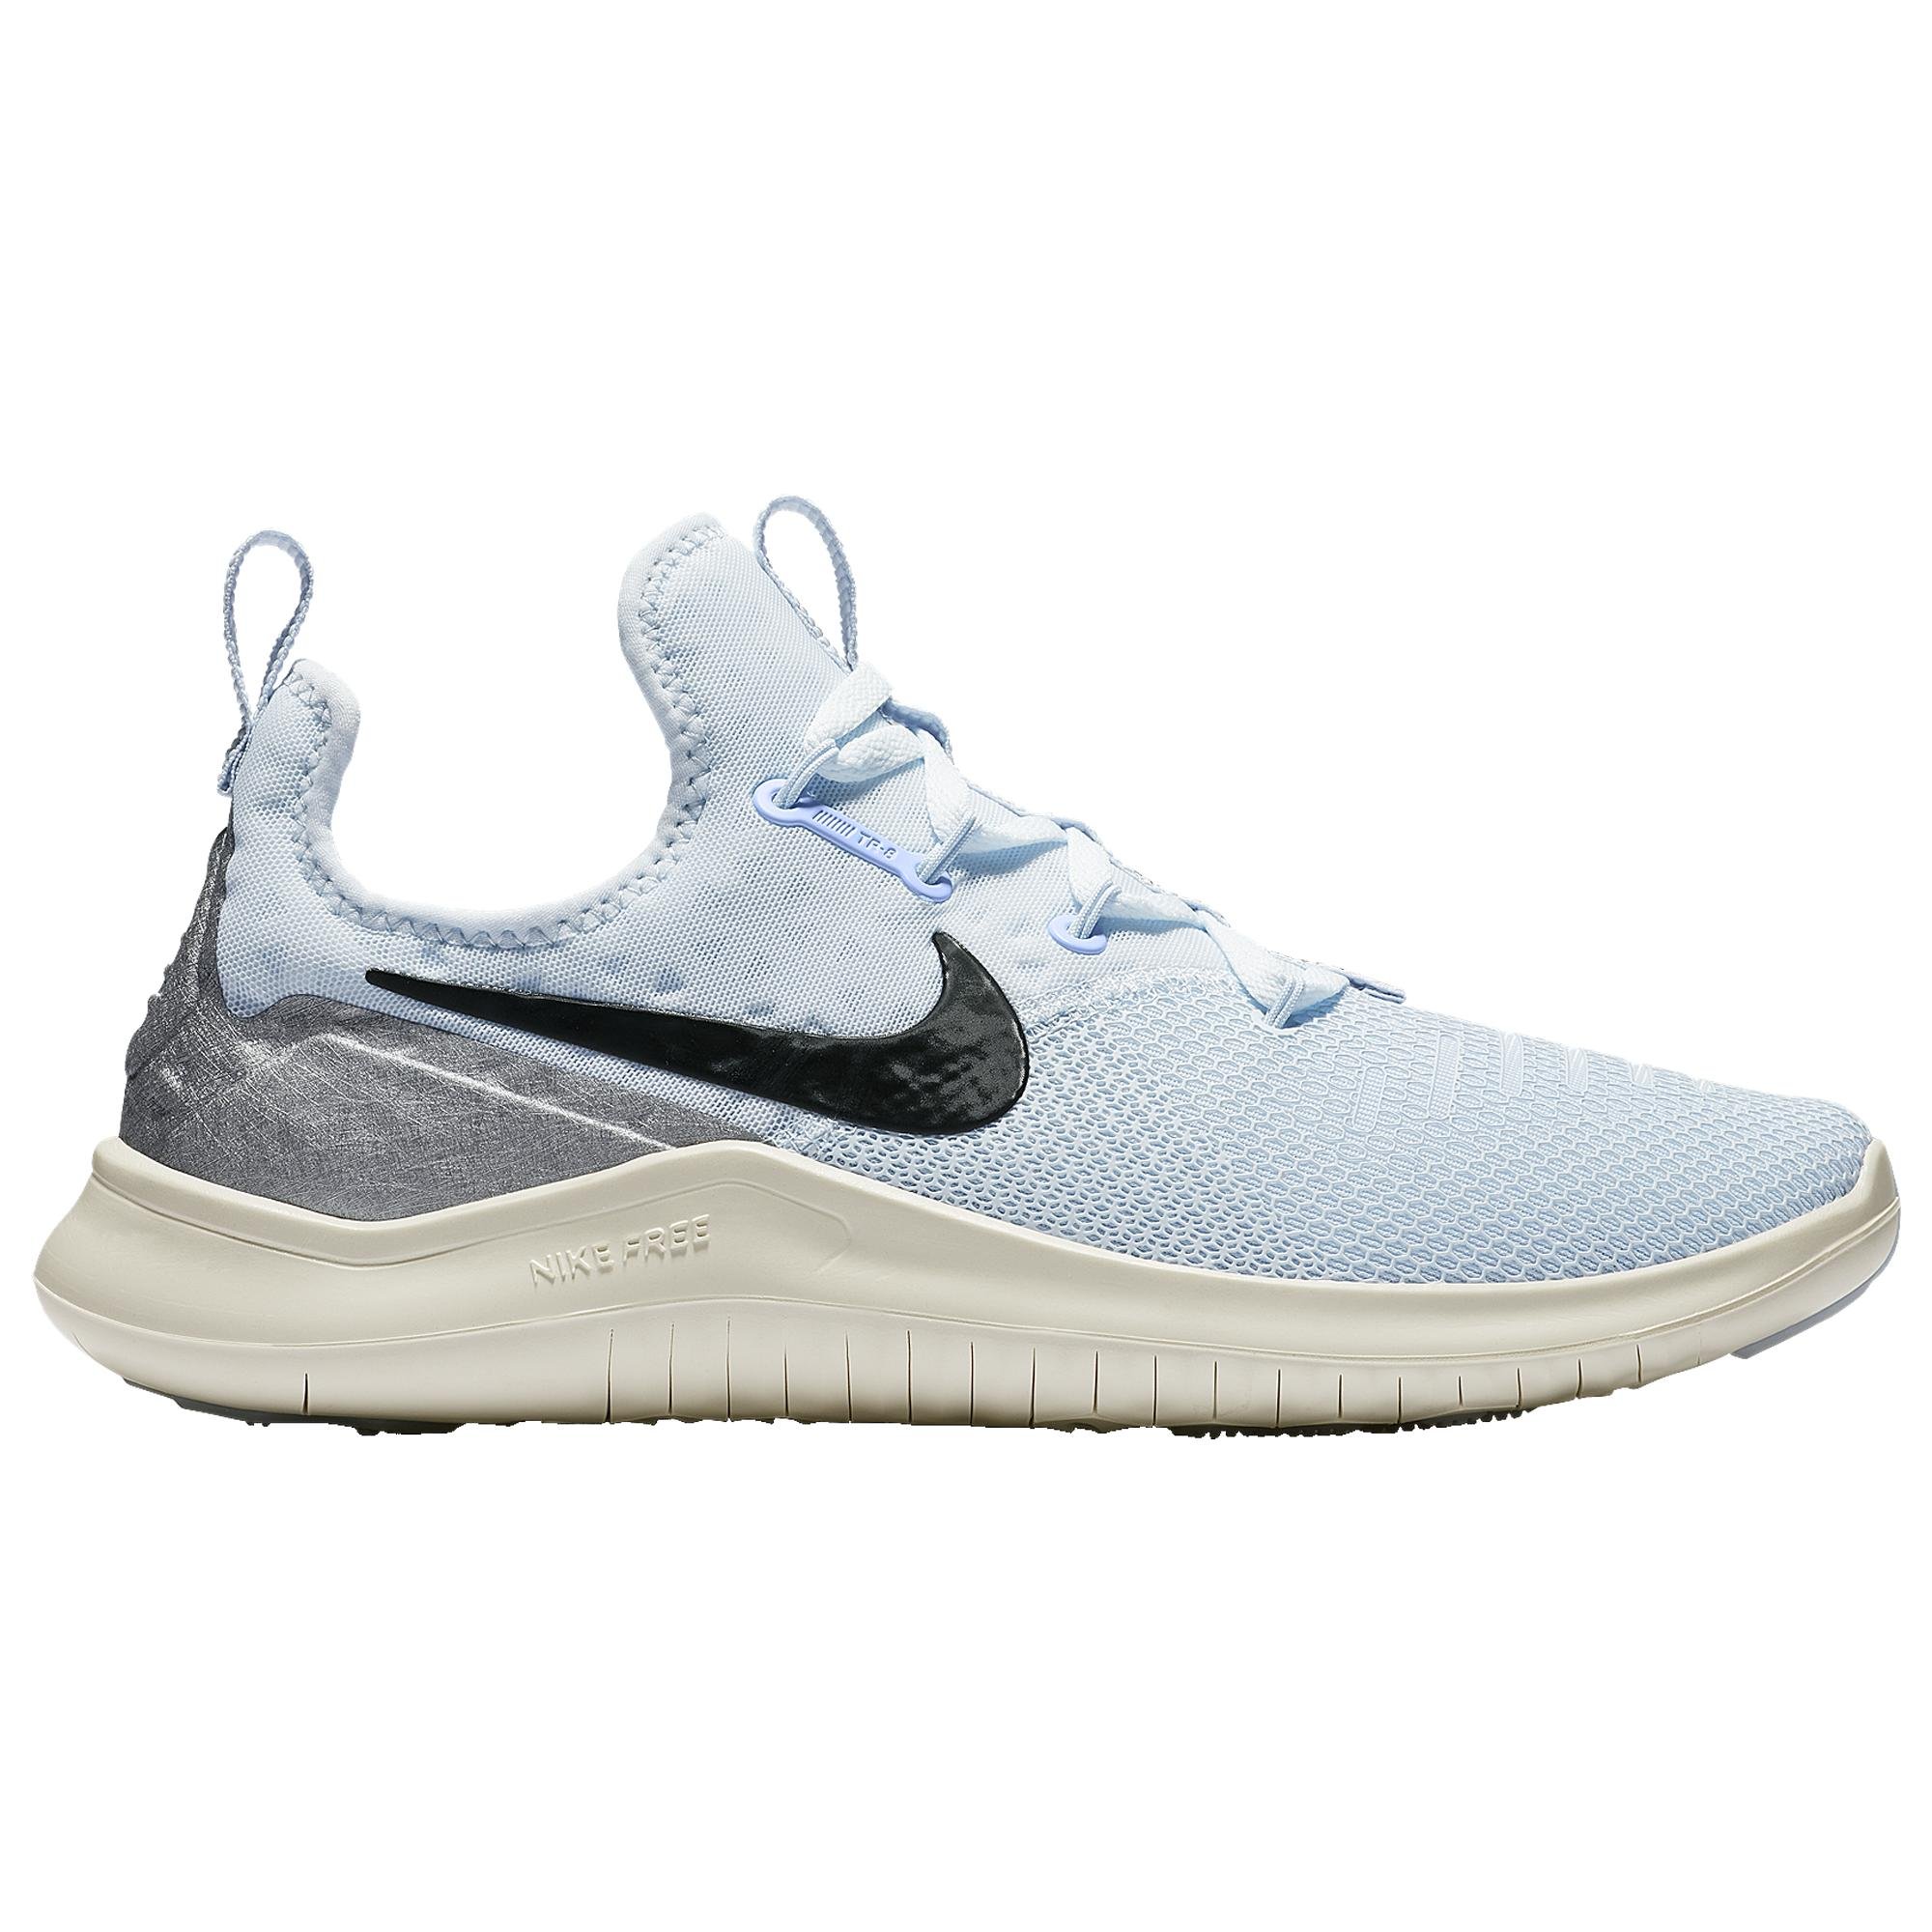 Nike Free Tr 8 Training Shoes in Blue 